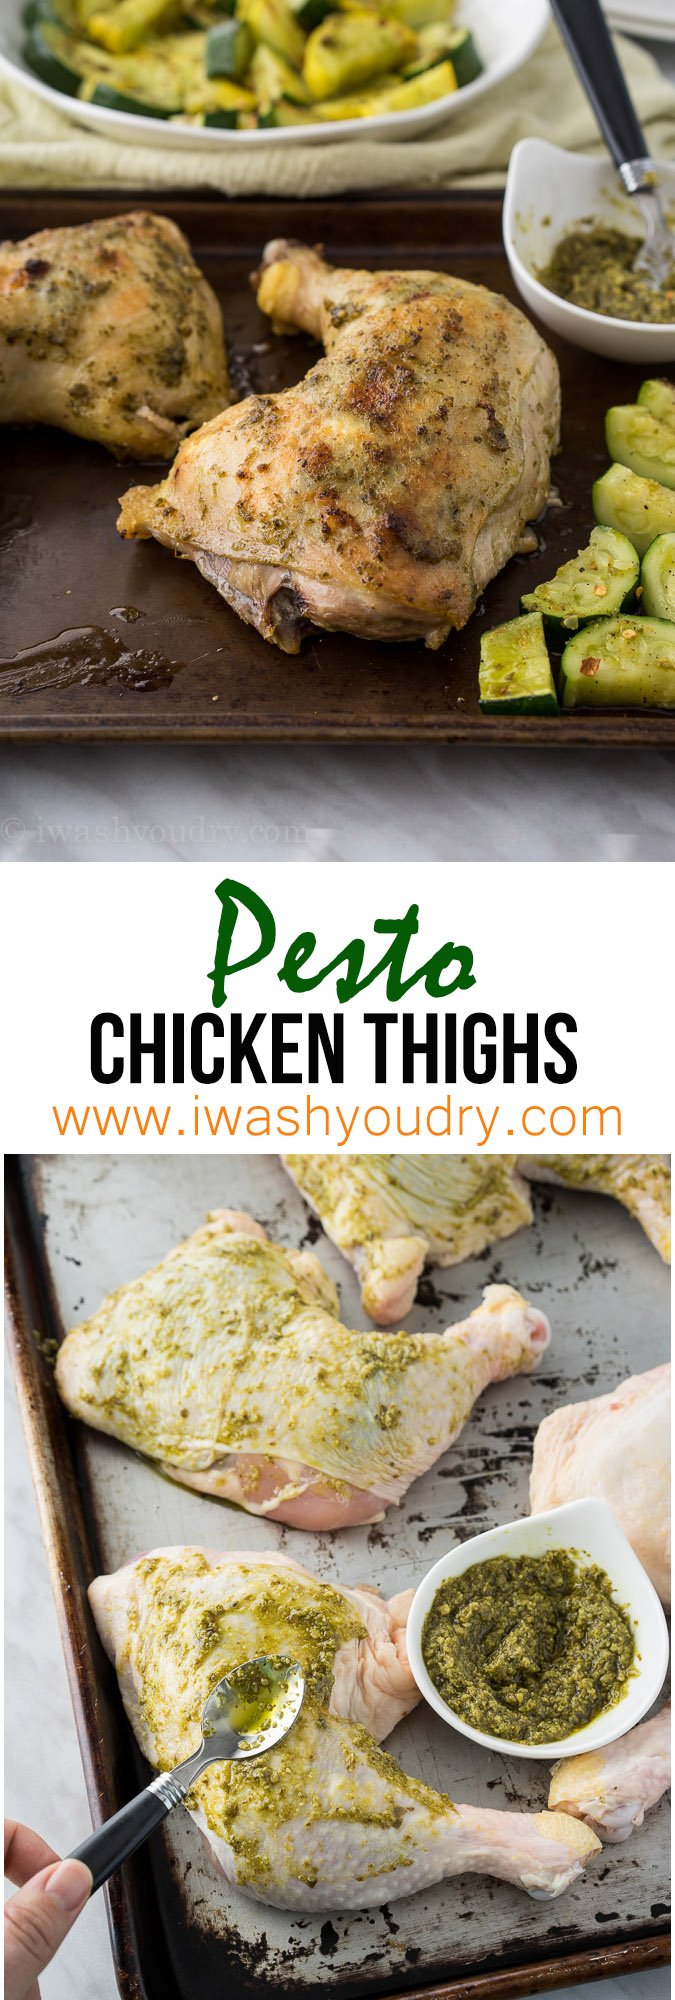 YUM! Less than 5 ingredients, minimal prep work, and a dinner the whole family loves!